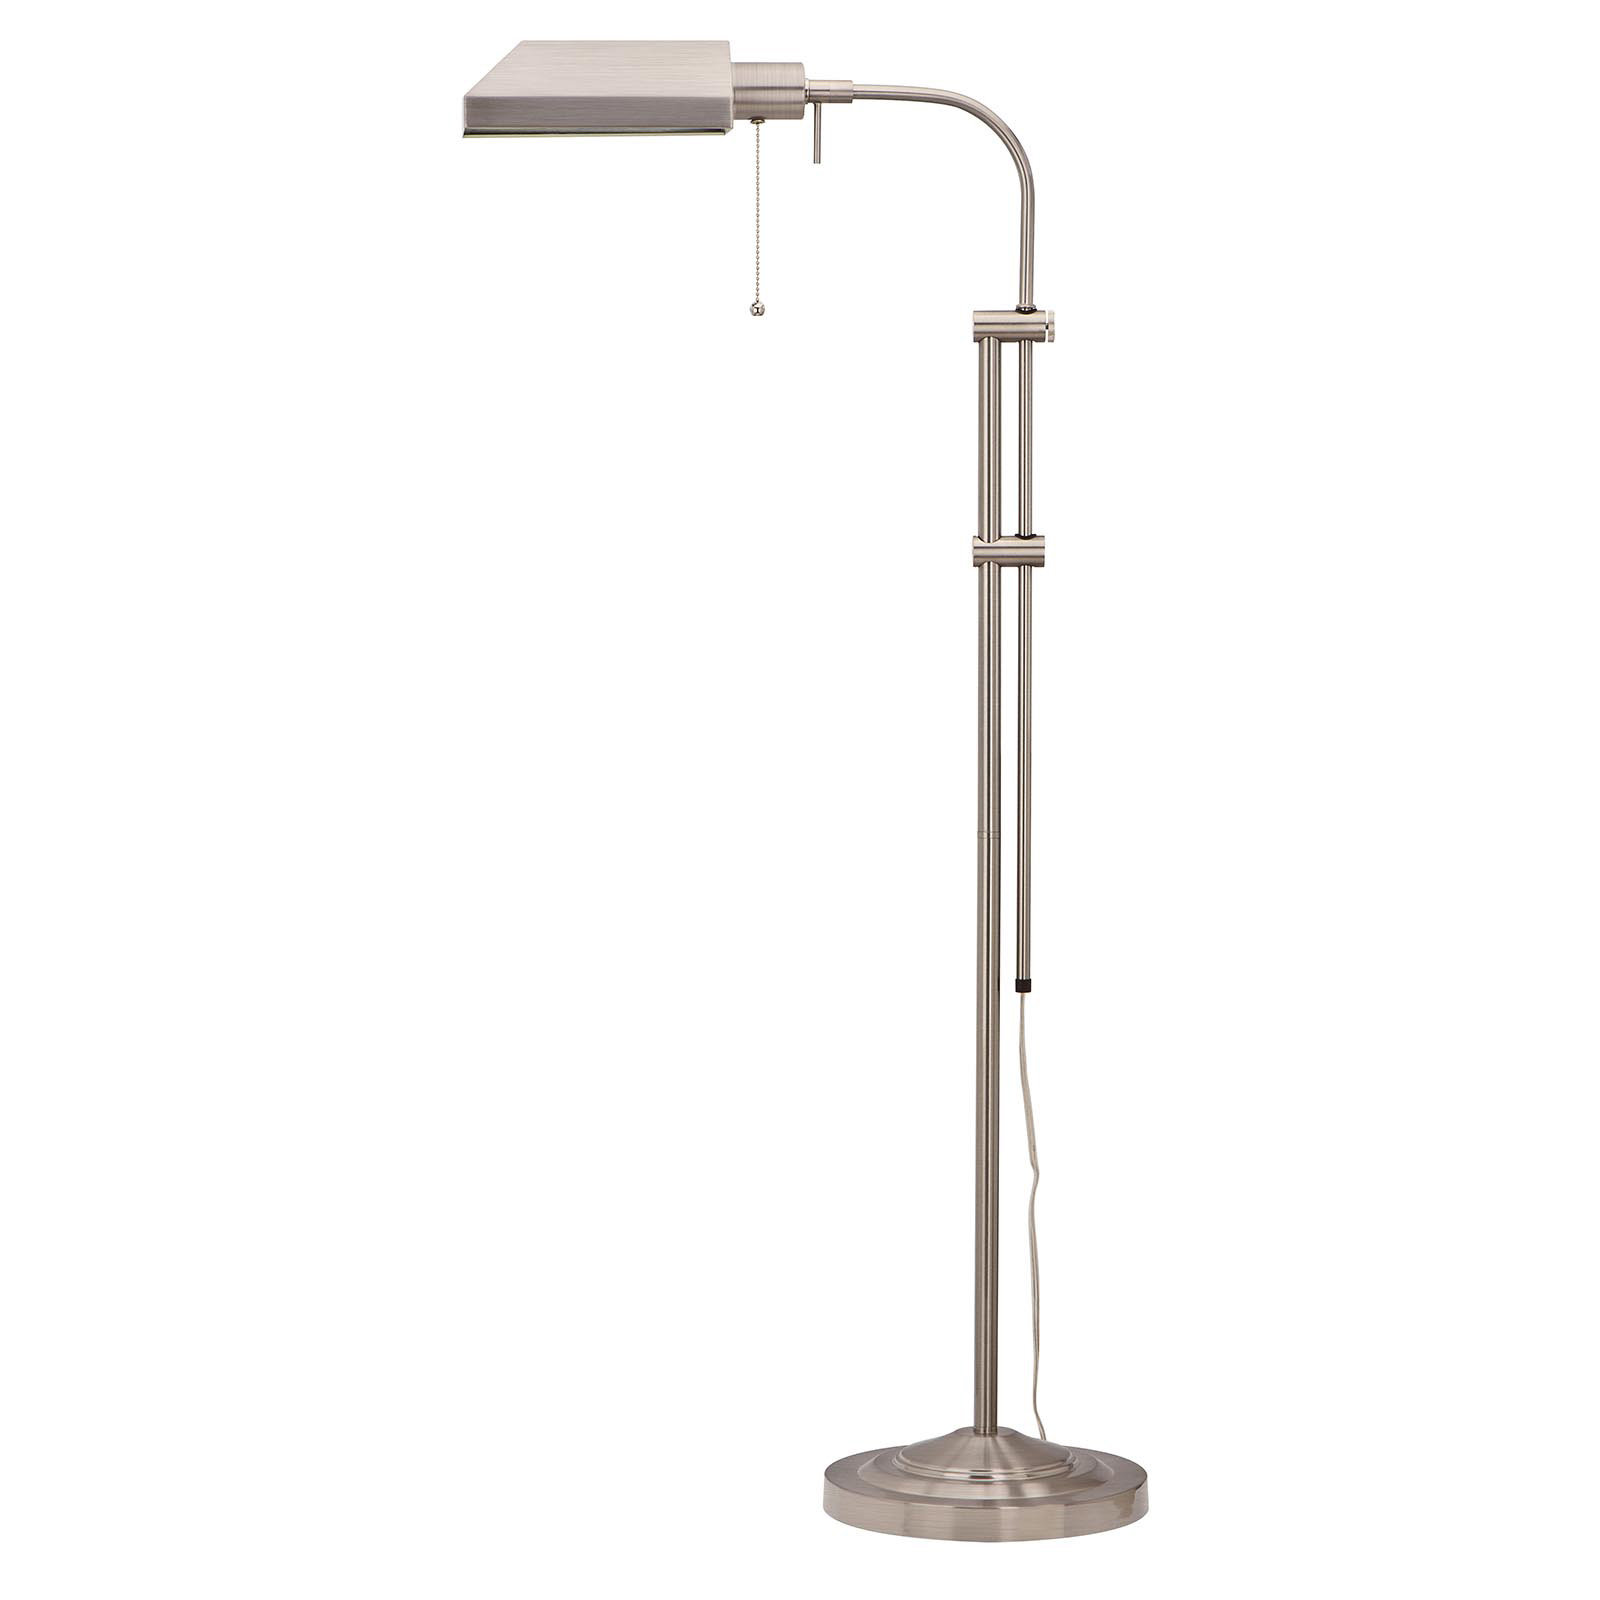 CAL BO-117FL-BS Floor Lamp with Adjustable Pole, 100 W, 1-Lamp, Fluorescent Lamp, Metal - 1